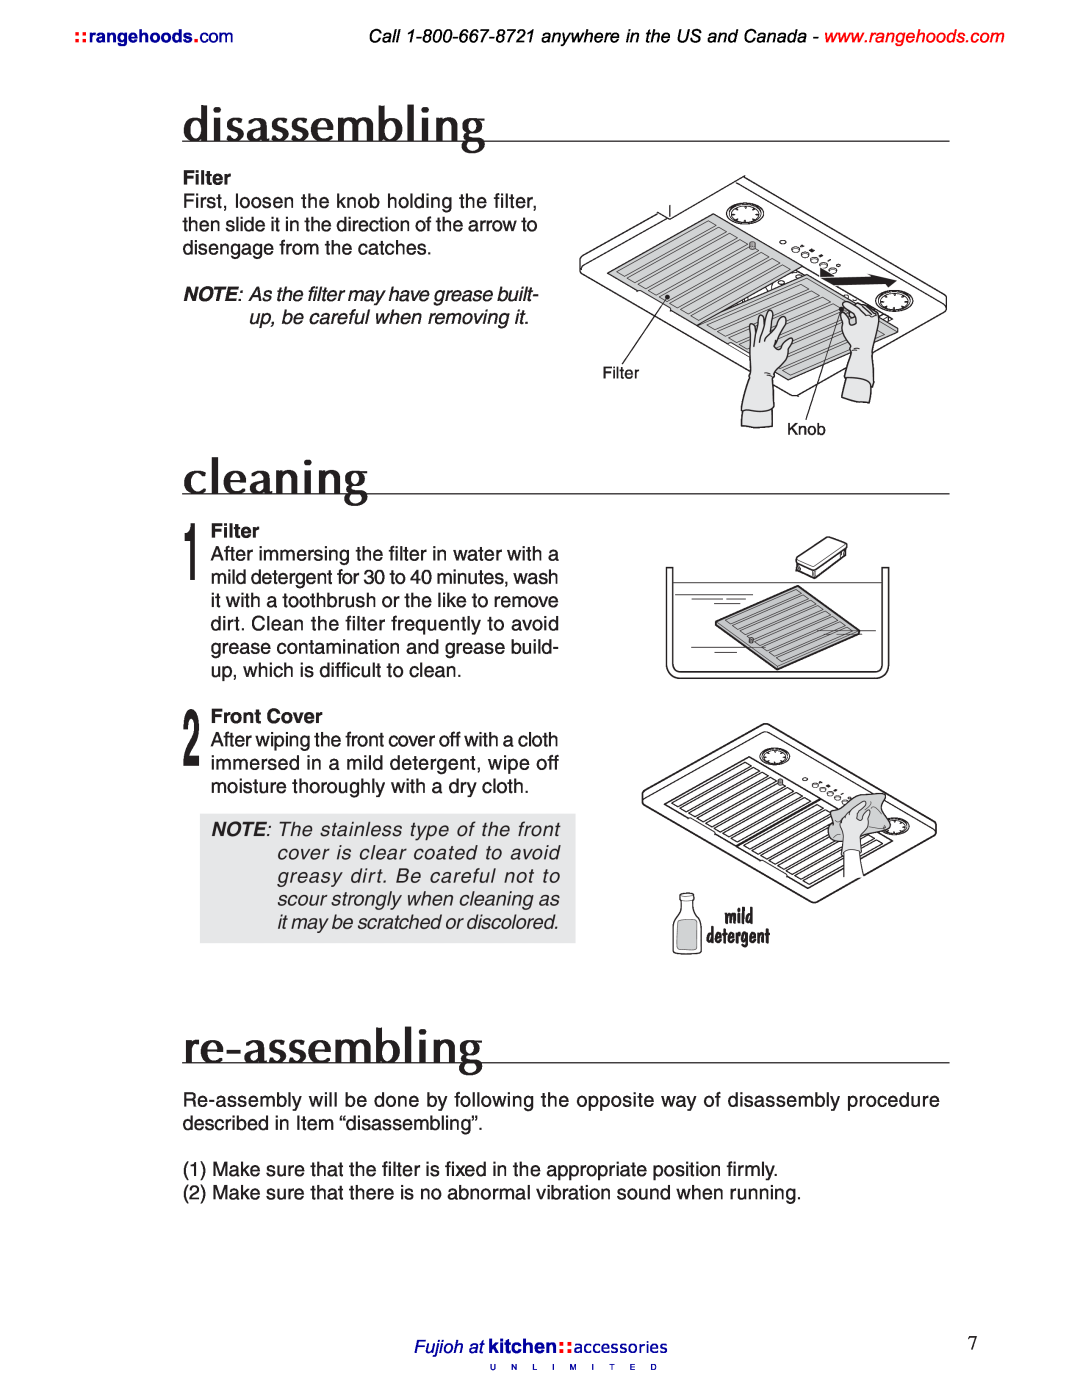 Fujioh 021, BUF-011 operation manual disassembling, cleaning, re-assembling, Filter, Front Cover 